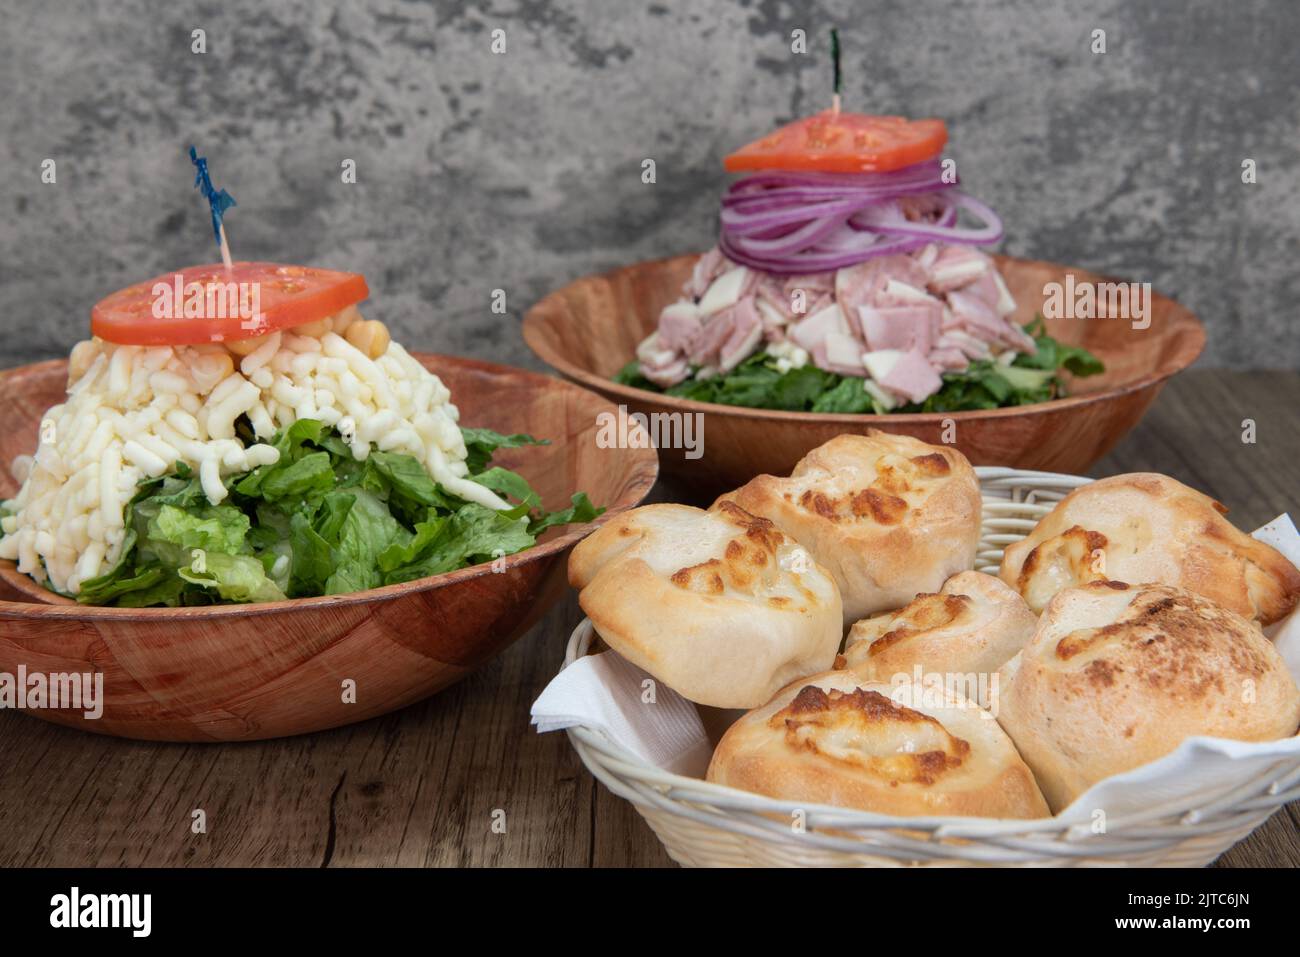 Italian food feast is set up on the table with two salads to choose from or a basket of garlic and cheese rolls. Stock Photo